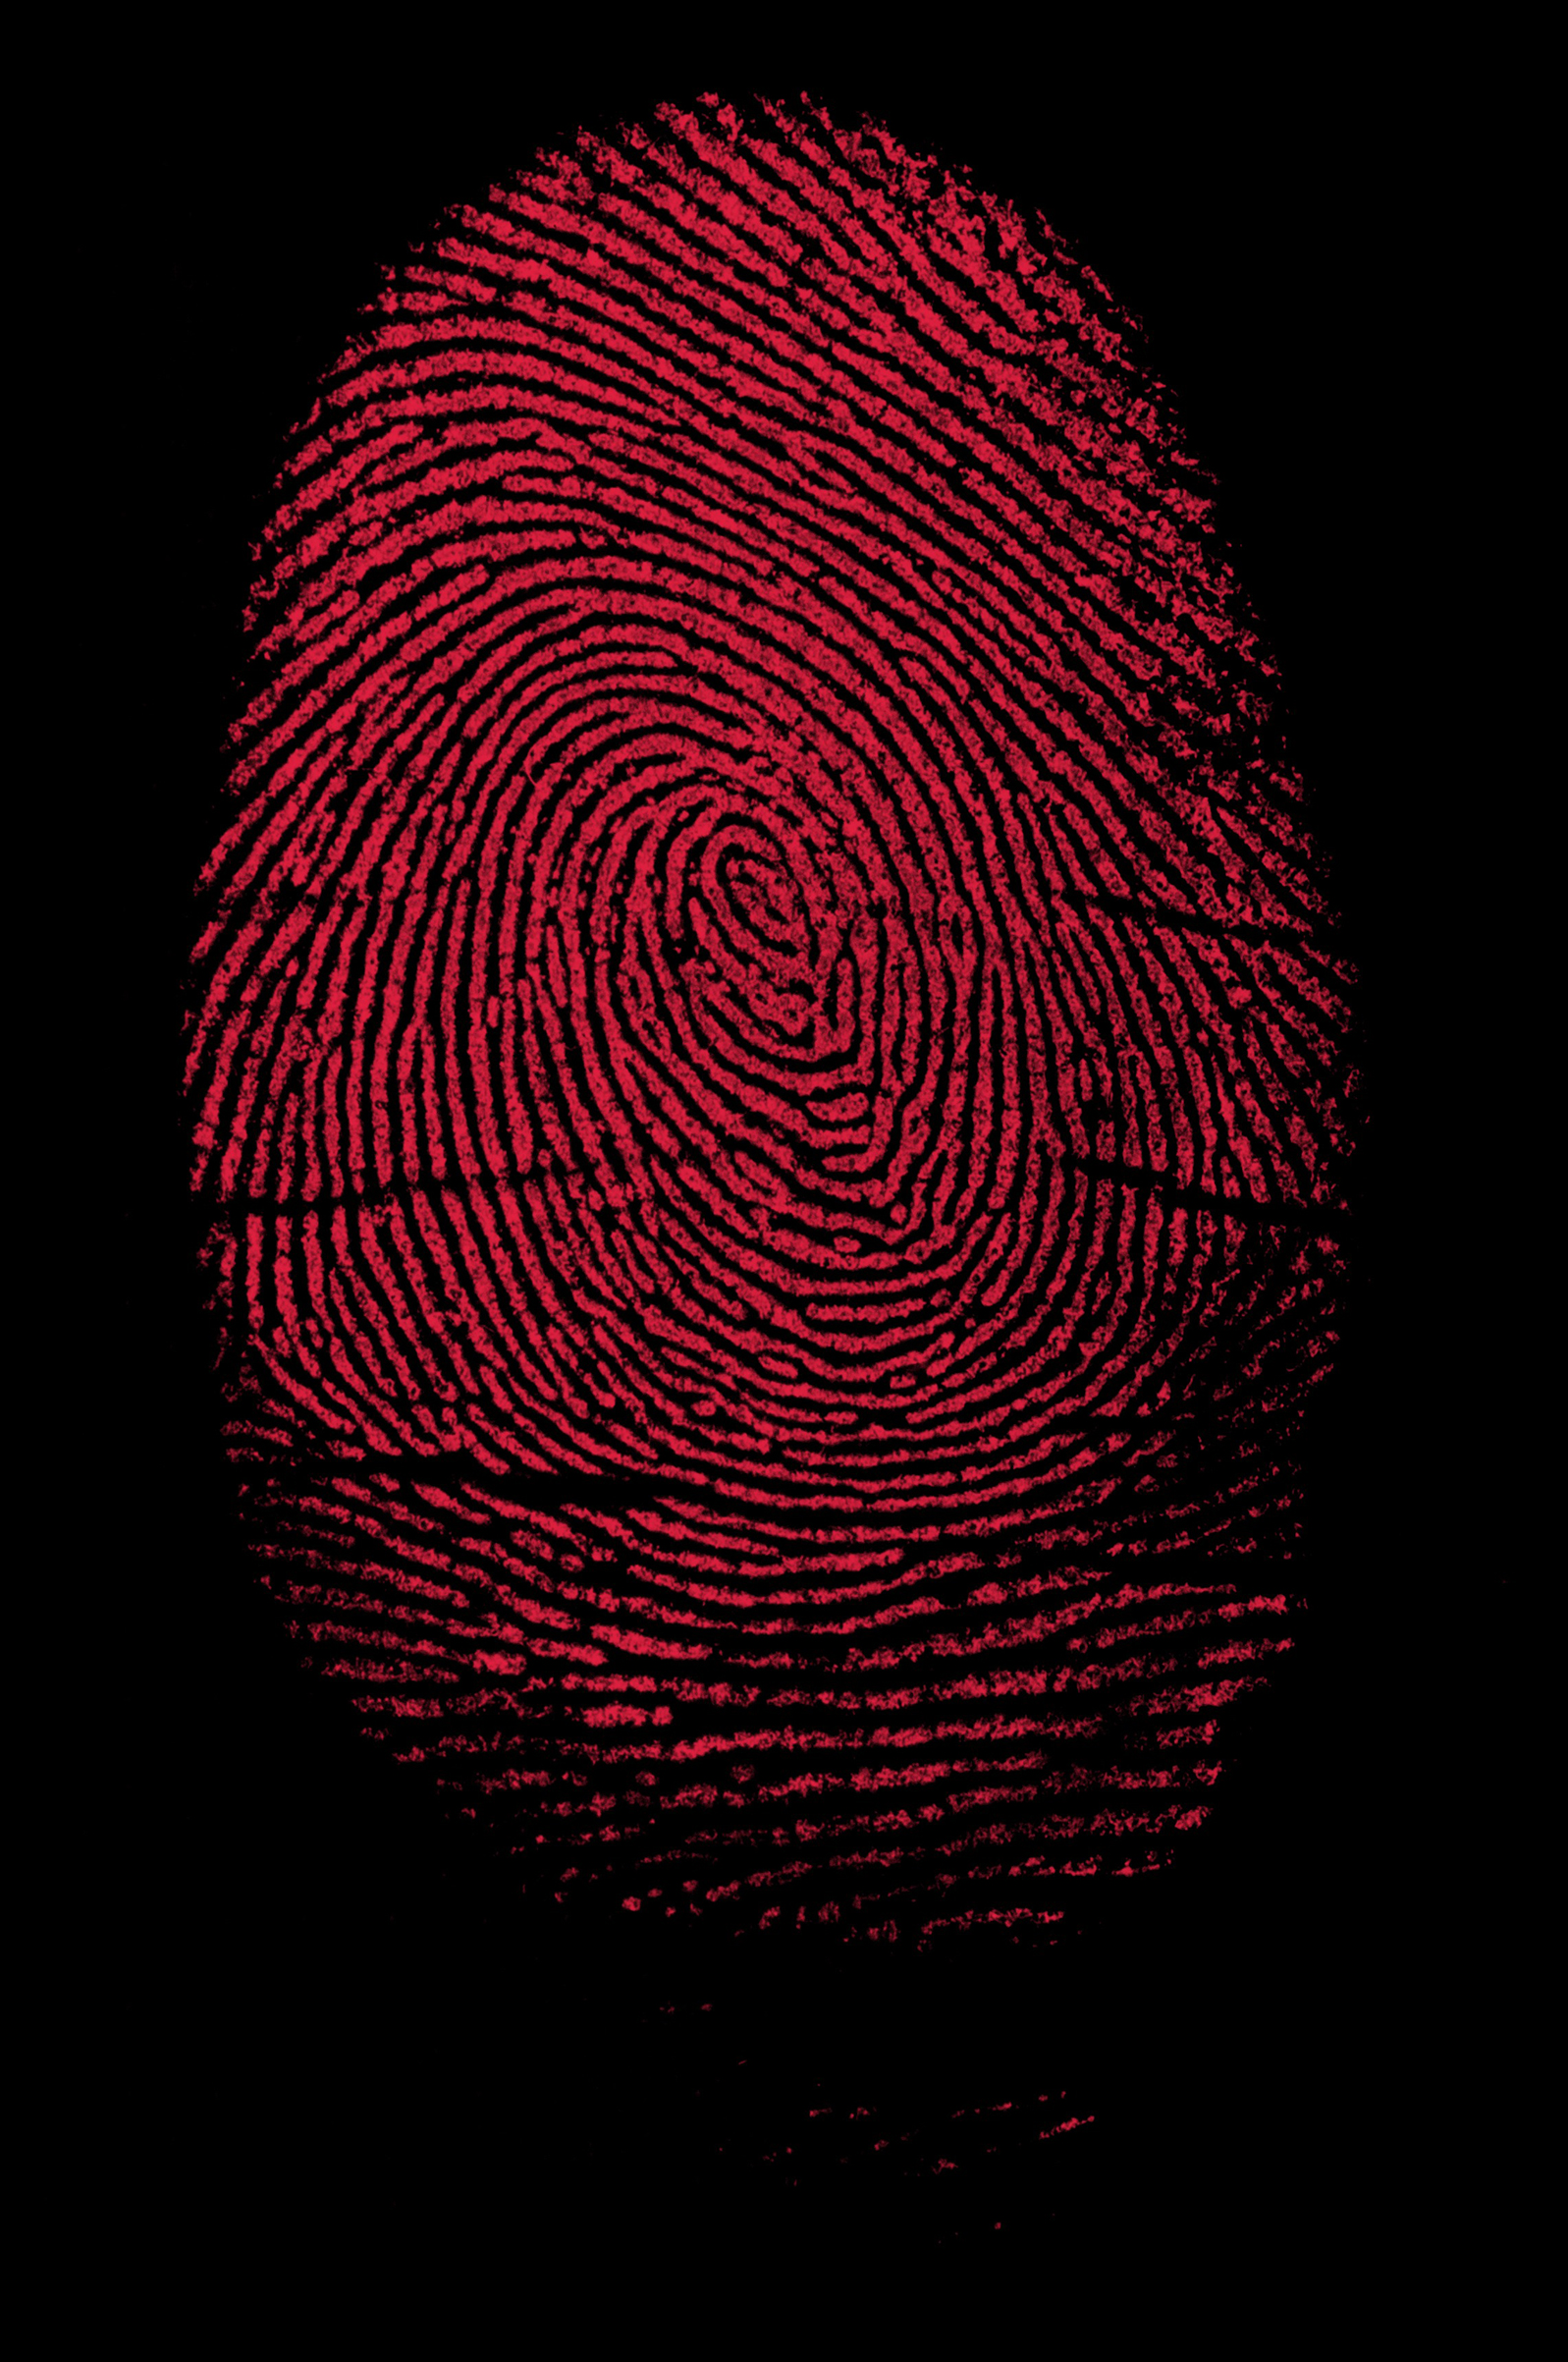 Biometric authentication is being billed as a better, safer alternative to passwords and pass codes